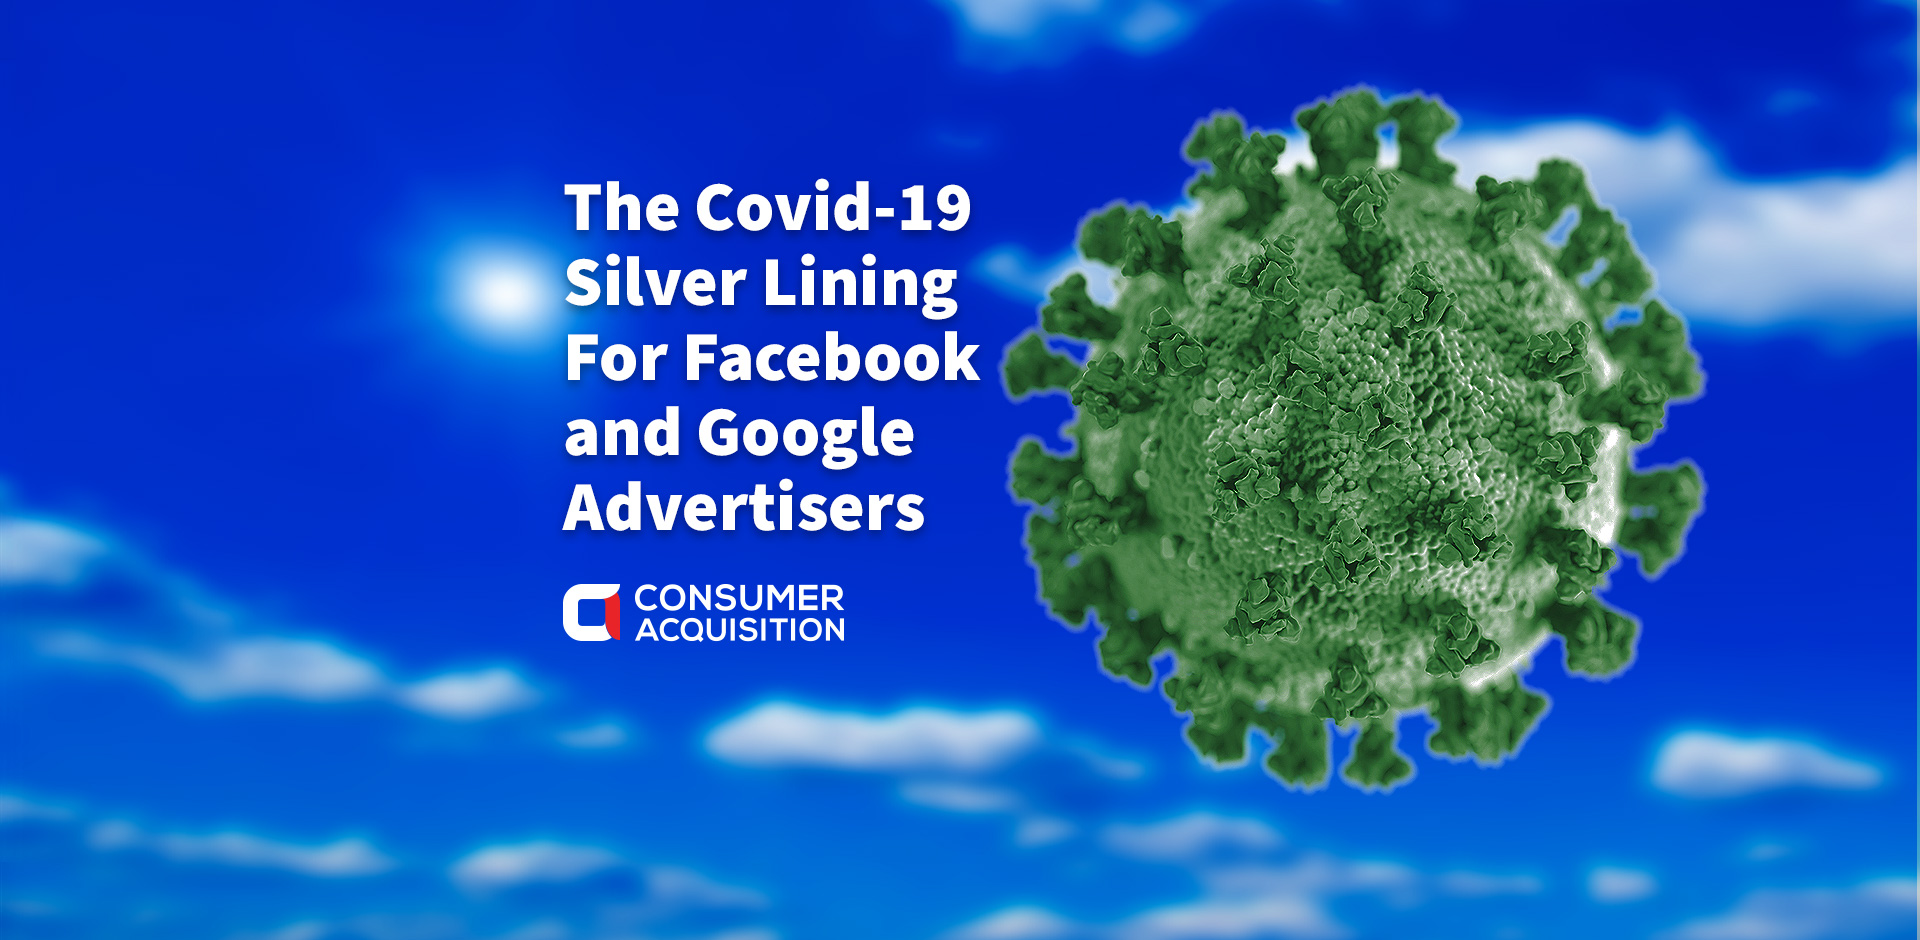 COVID-19: Mobile Ad Traffic & ROAS Up, CPMs Down, Opportunity To Scale